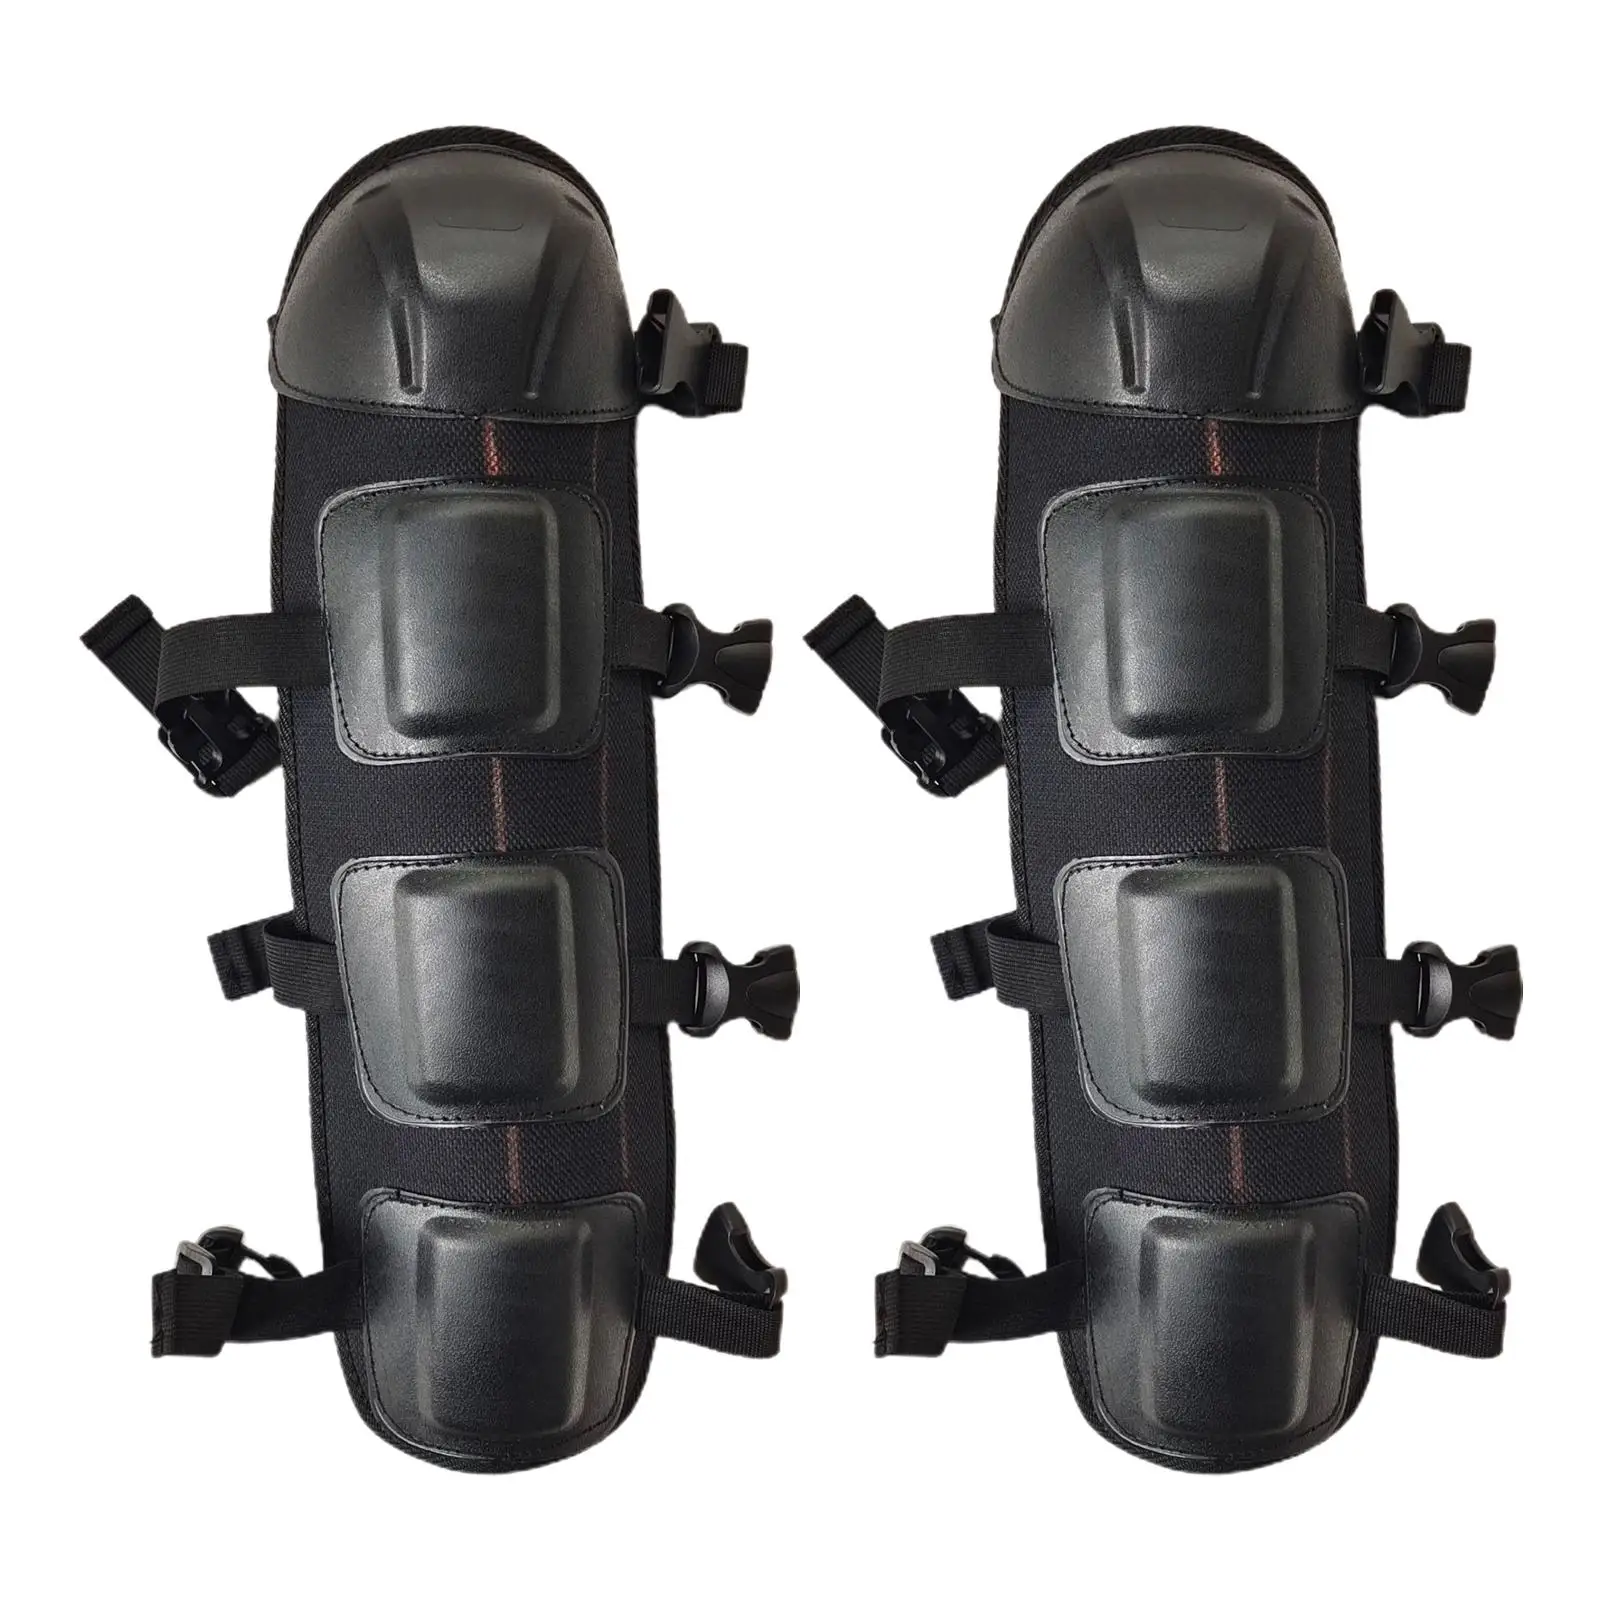 Knee Pads Motorcycle Knee Shin Guards Kneelet Protective Gear Adjustable Straps